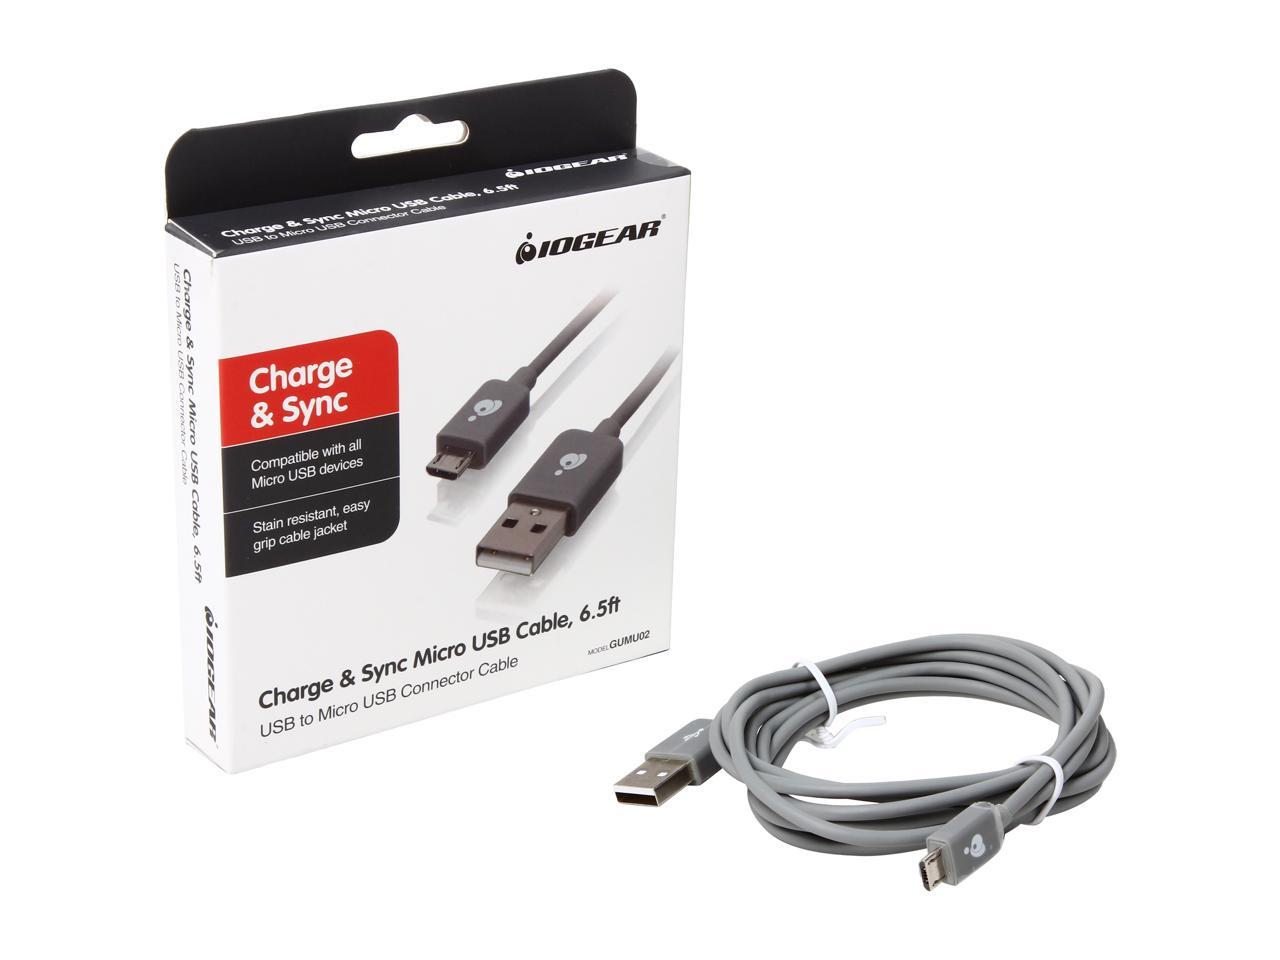 IOGEAR GUMU02 Gray USB Type A to Micro USB Type B Charge & Sync Cable 6.5ft